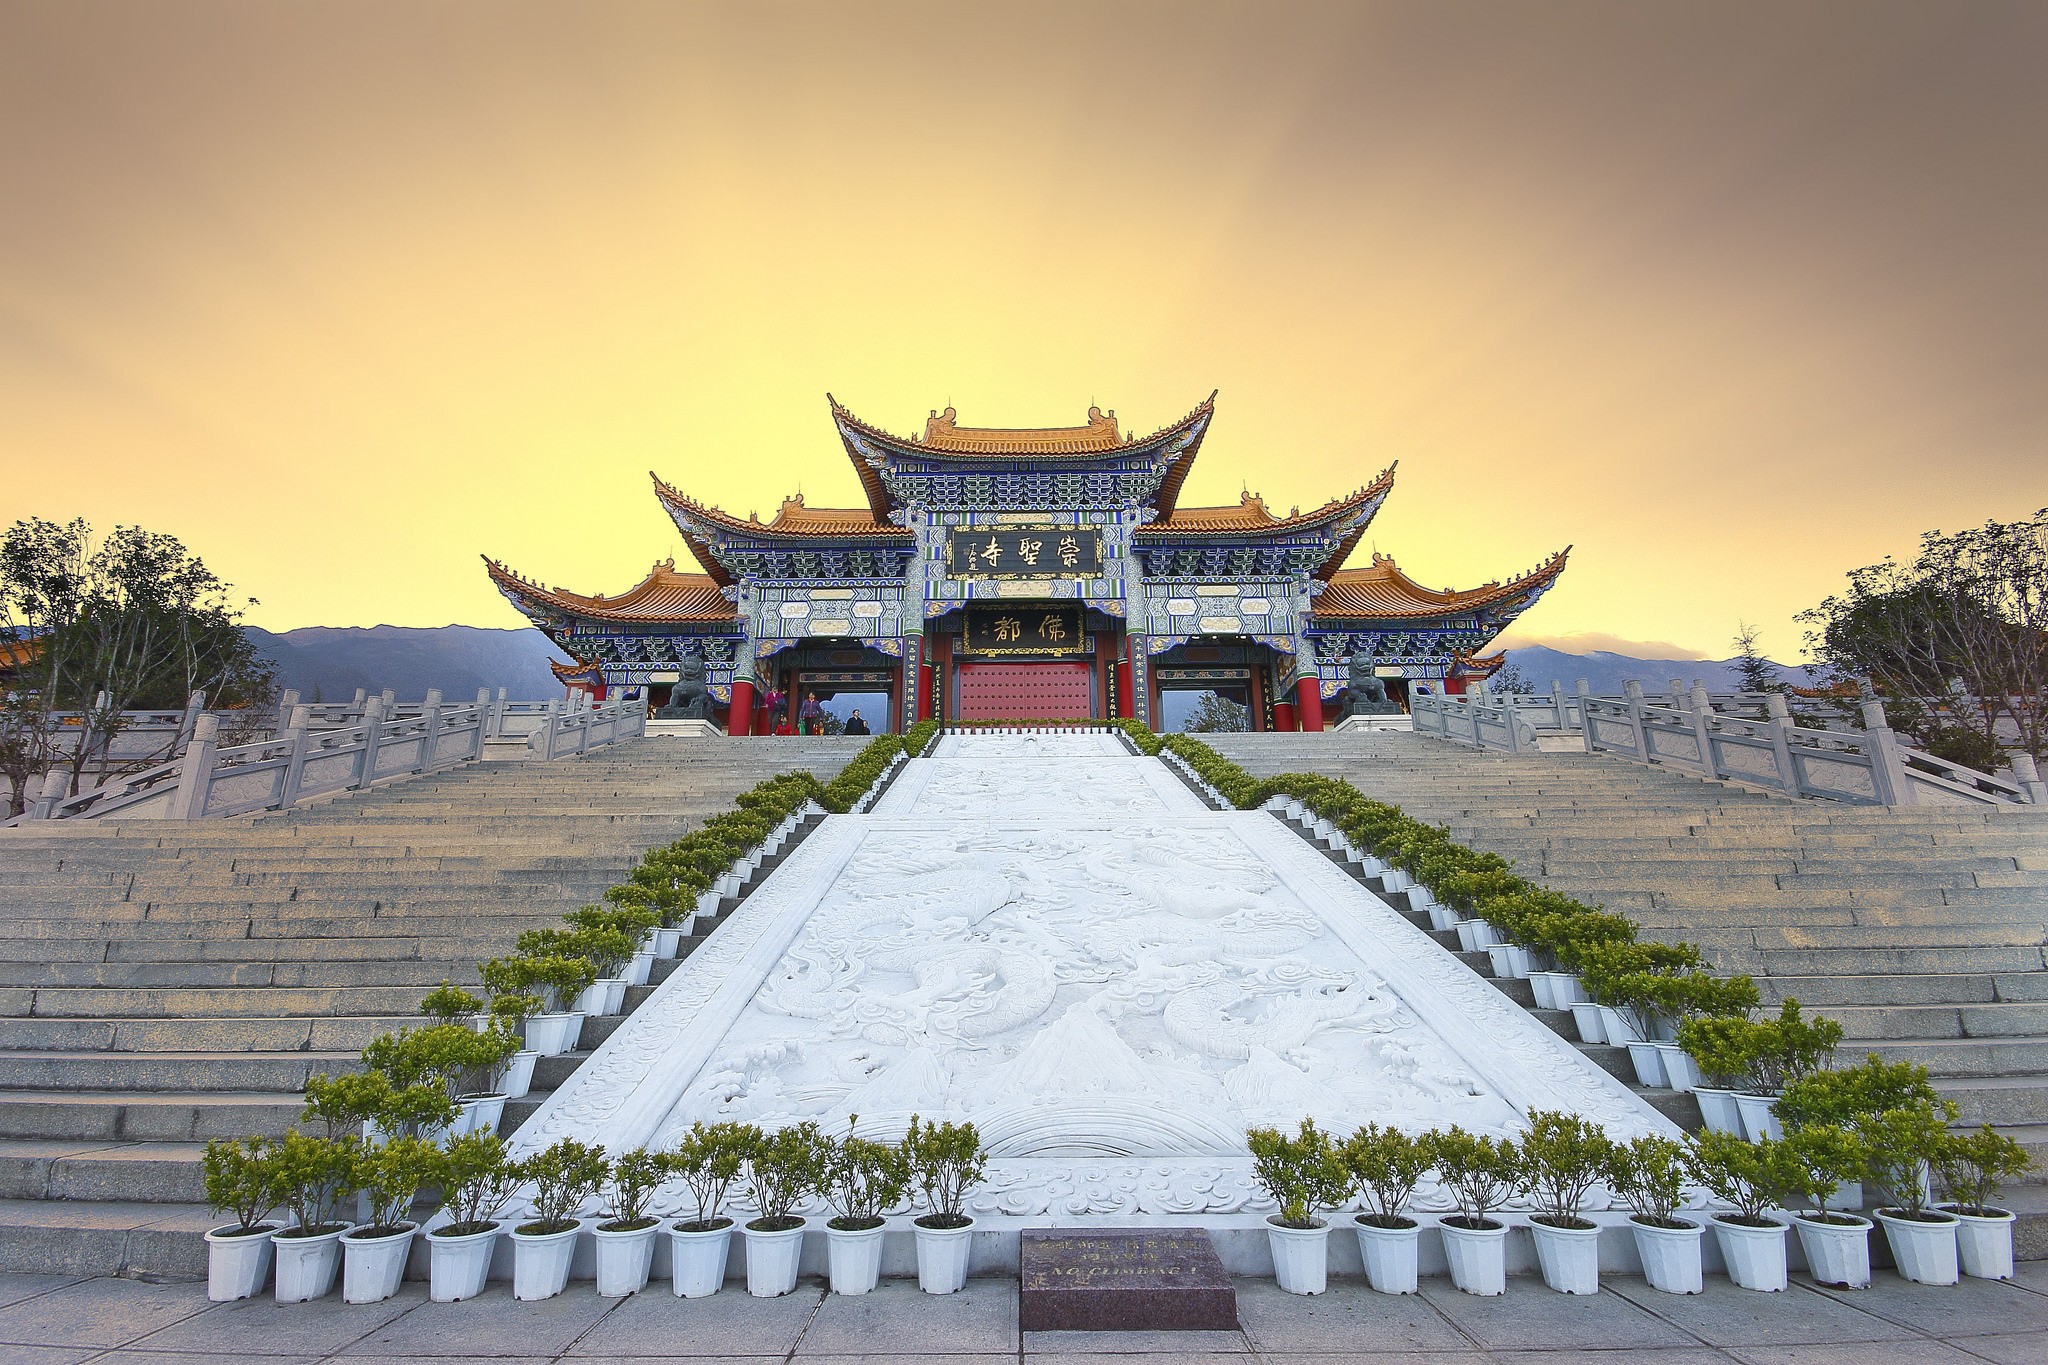 General 2048x1365 architecture building city Asian architecture China temple sun rays